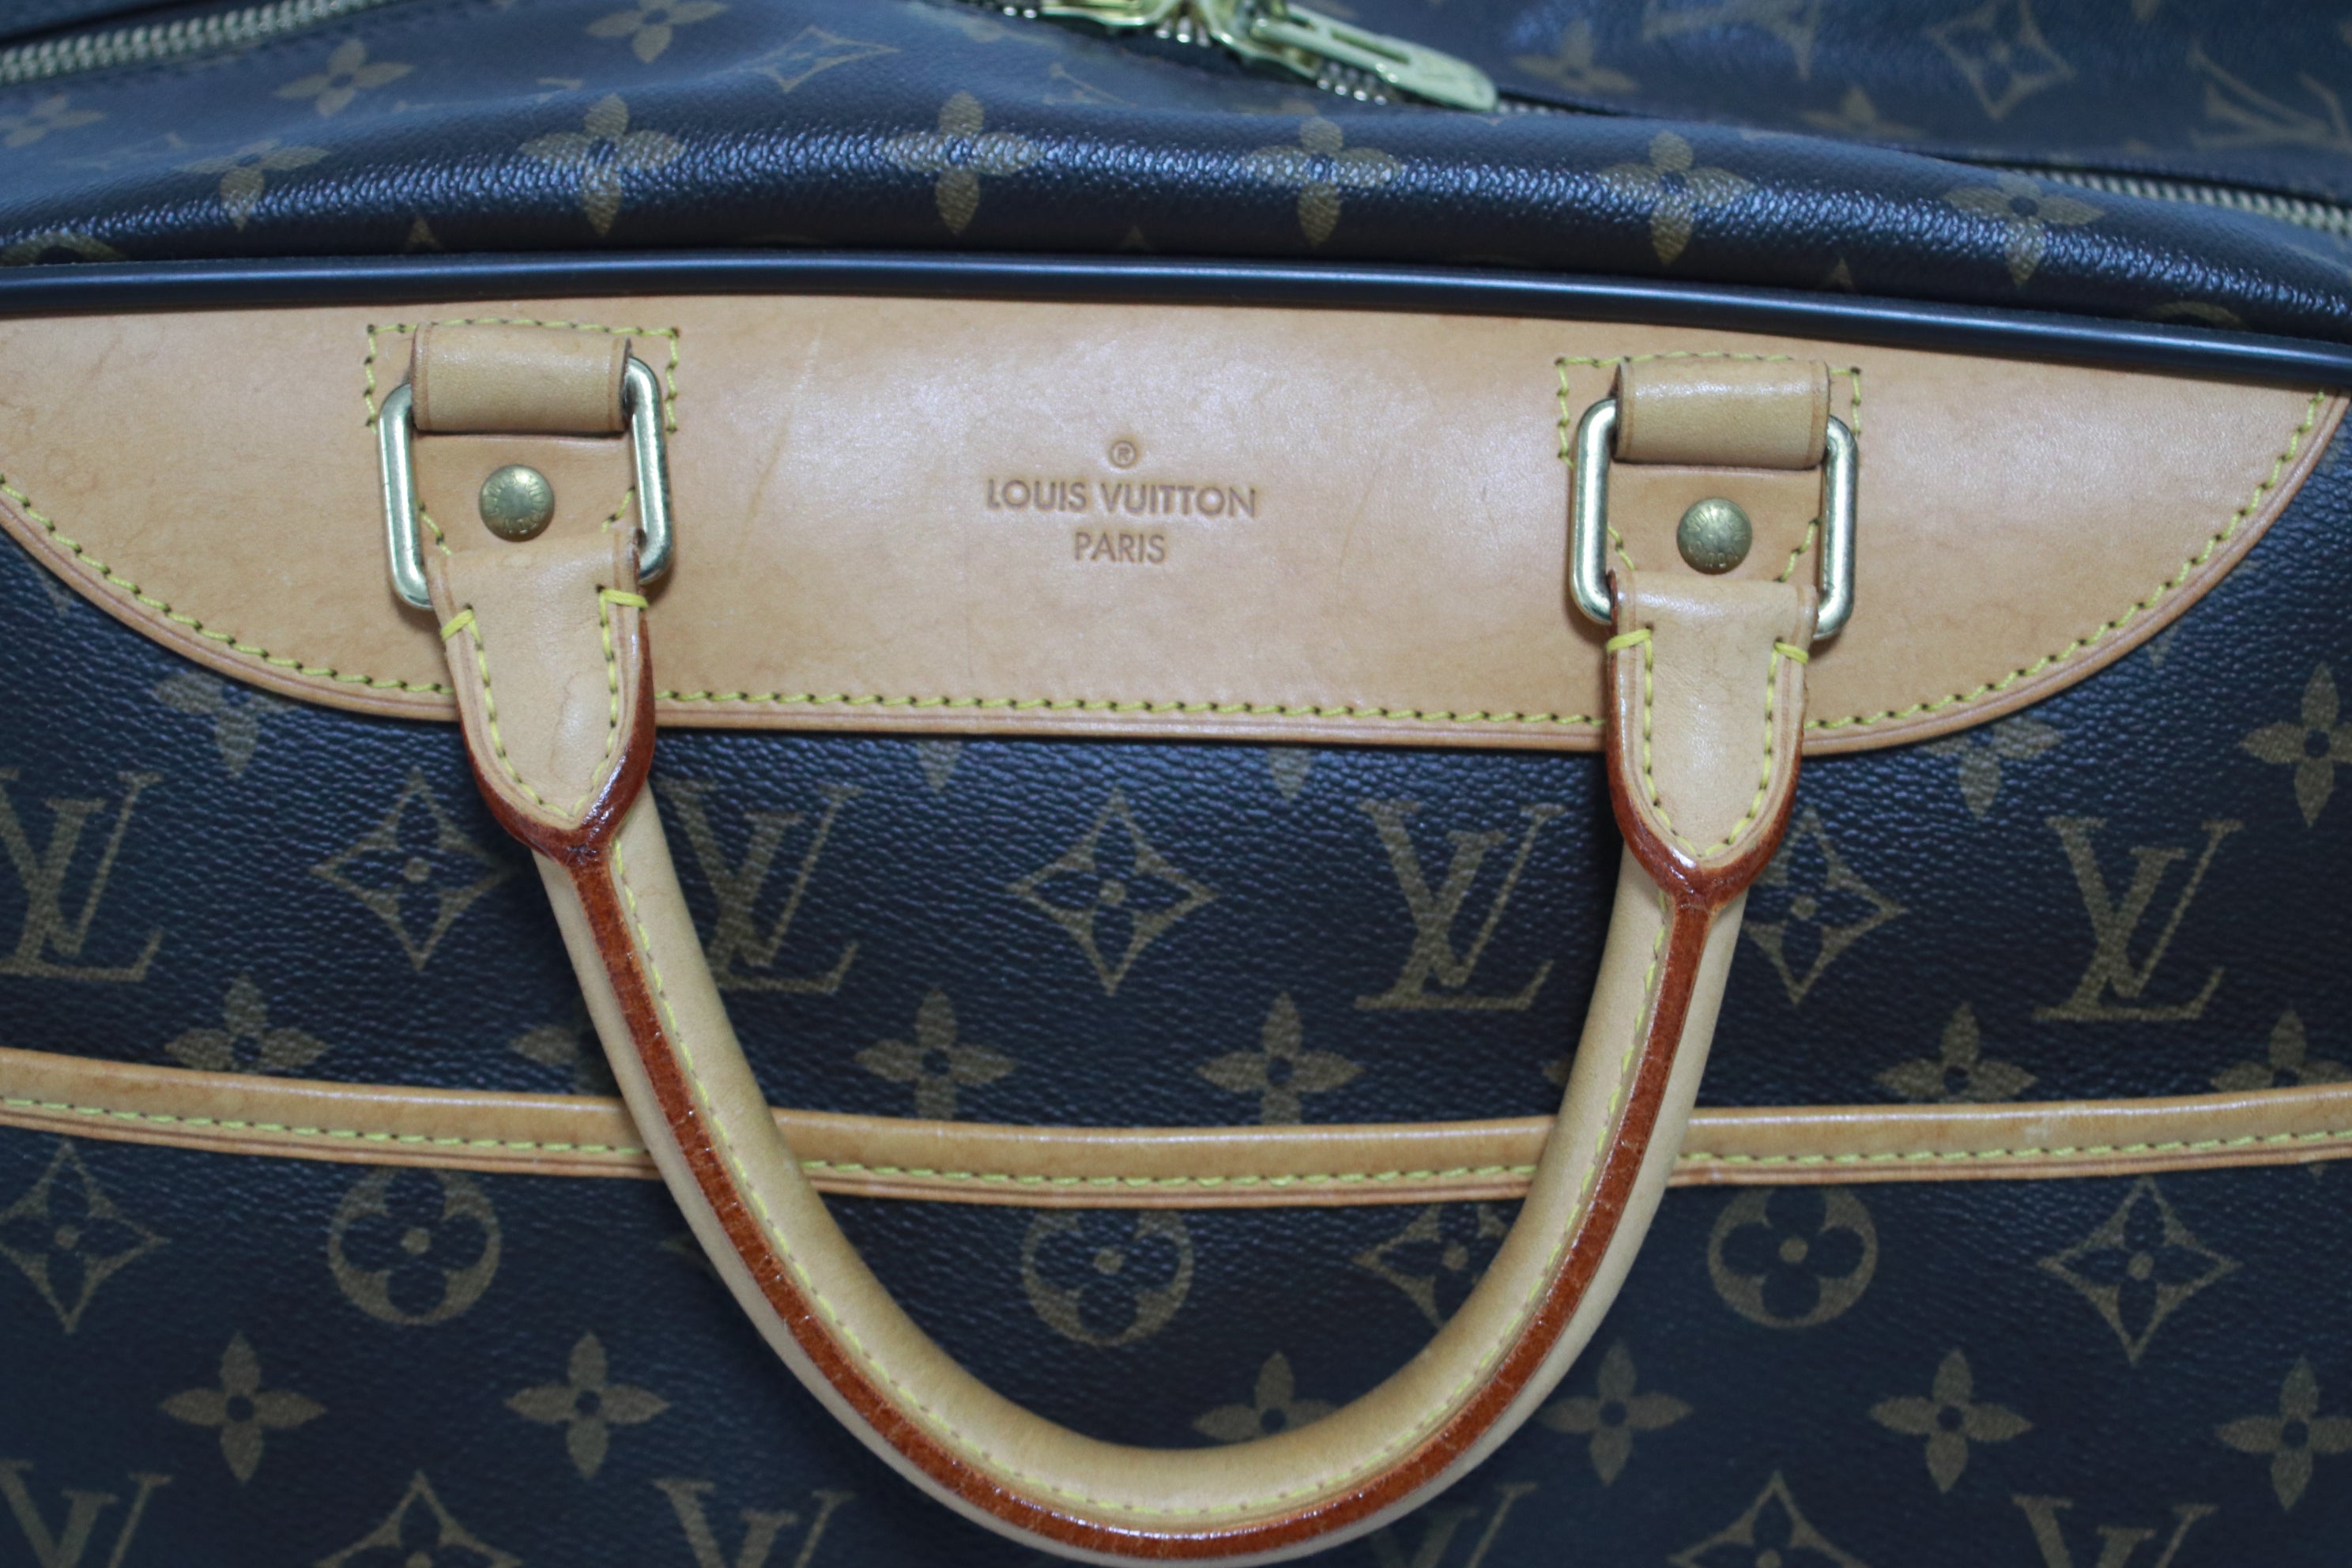 Louis Vuitton Eole 50 Rolling Luggage Used (3856)